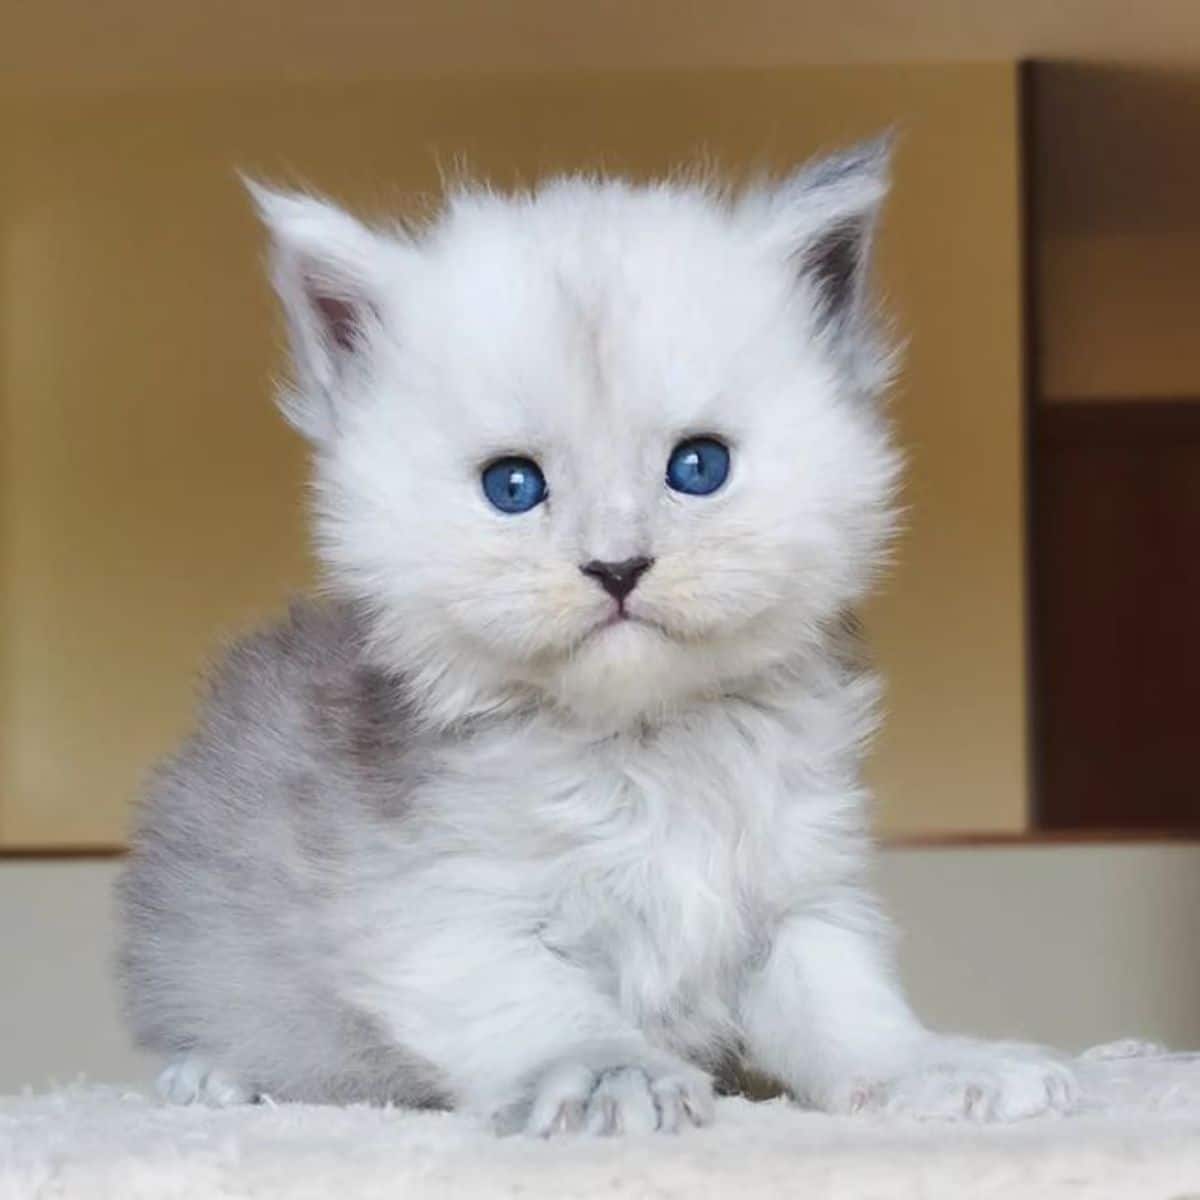 A cute white fluffy maine coon kitten sitting on a white carpet.